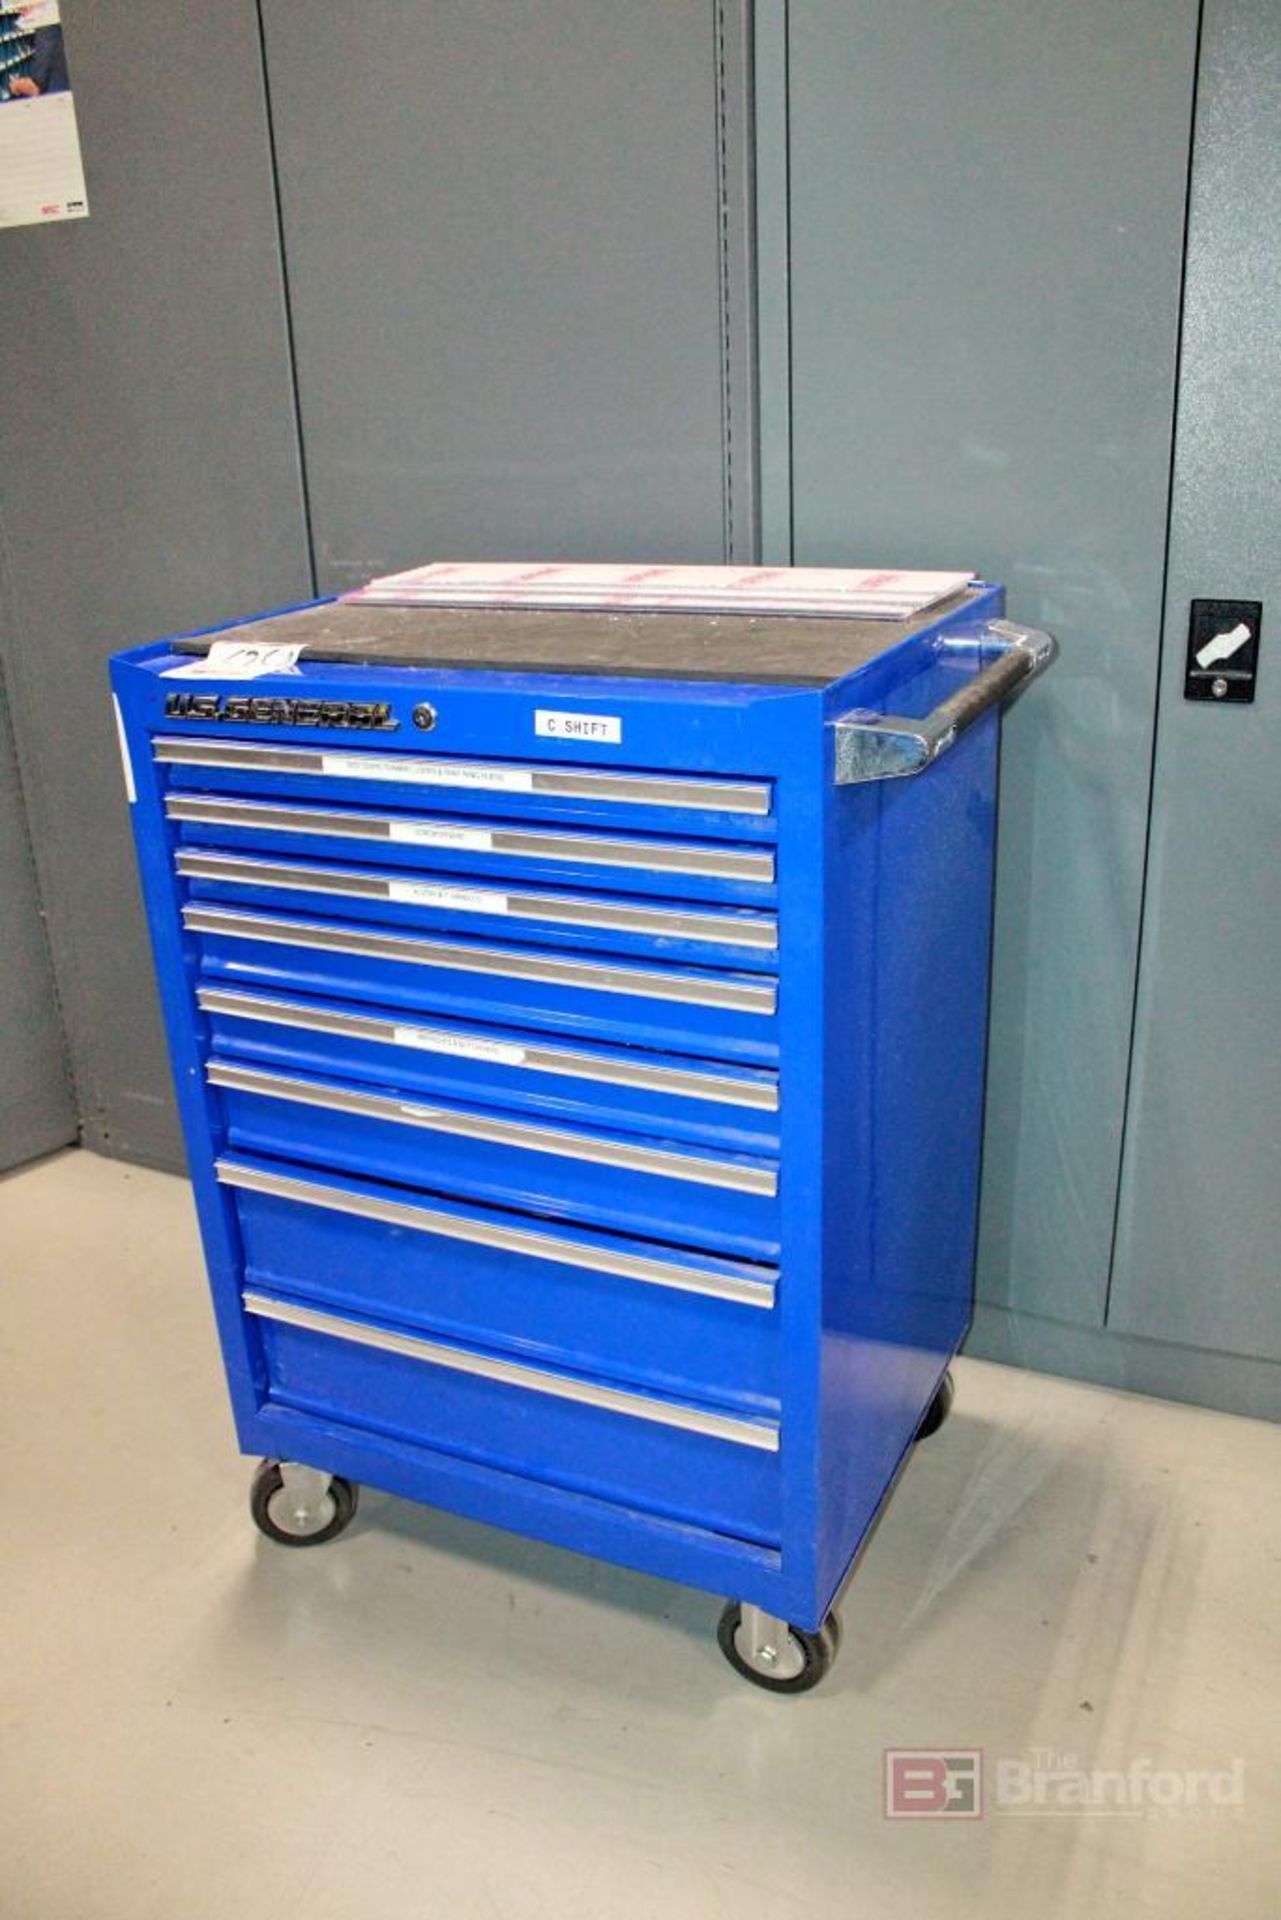 8-Drawer Rolling Tool Chest, U.S. General - Image 2 of 2